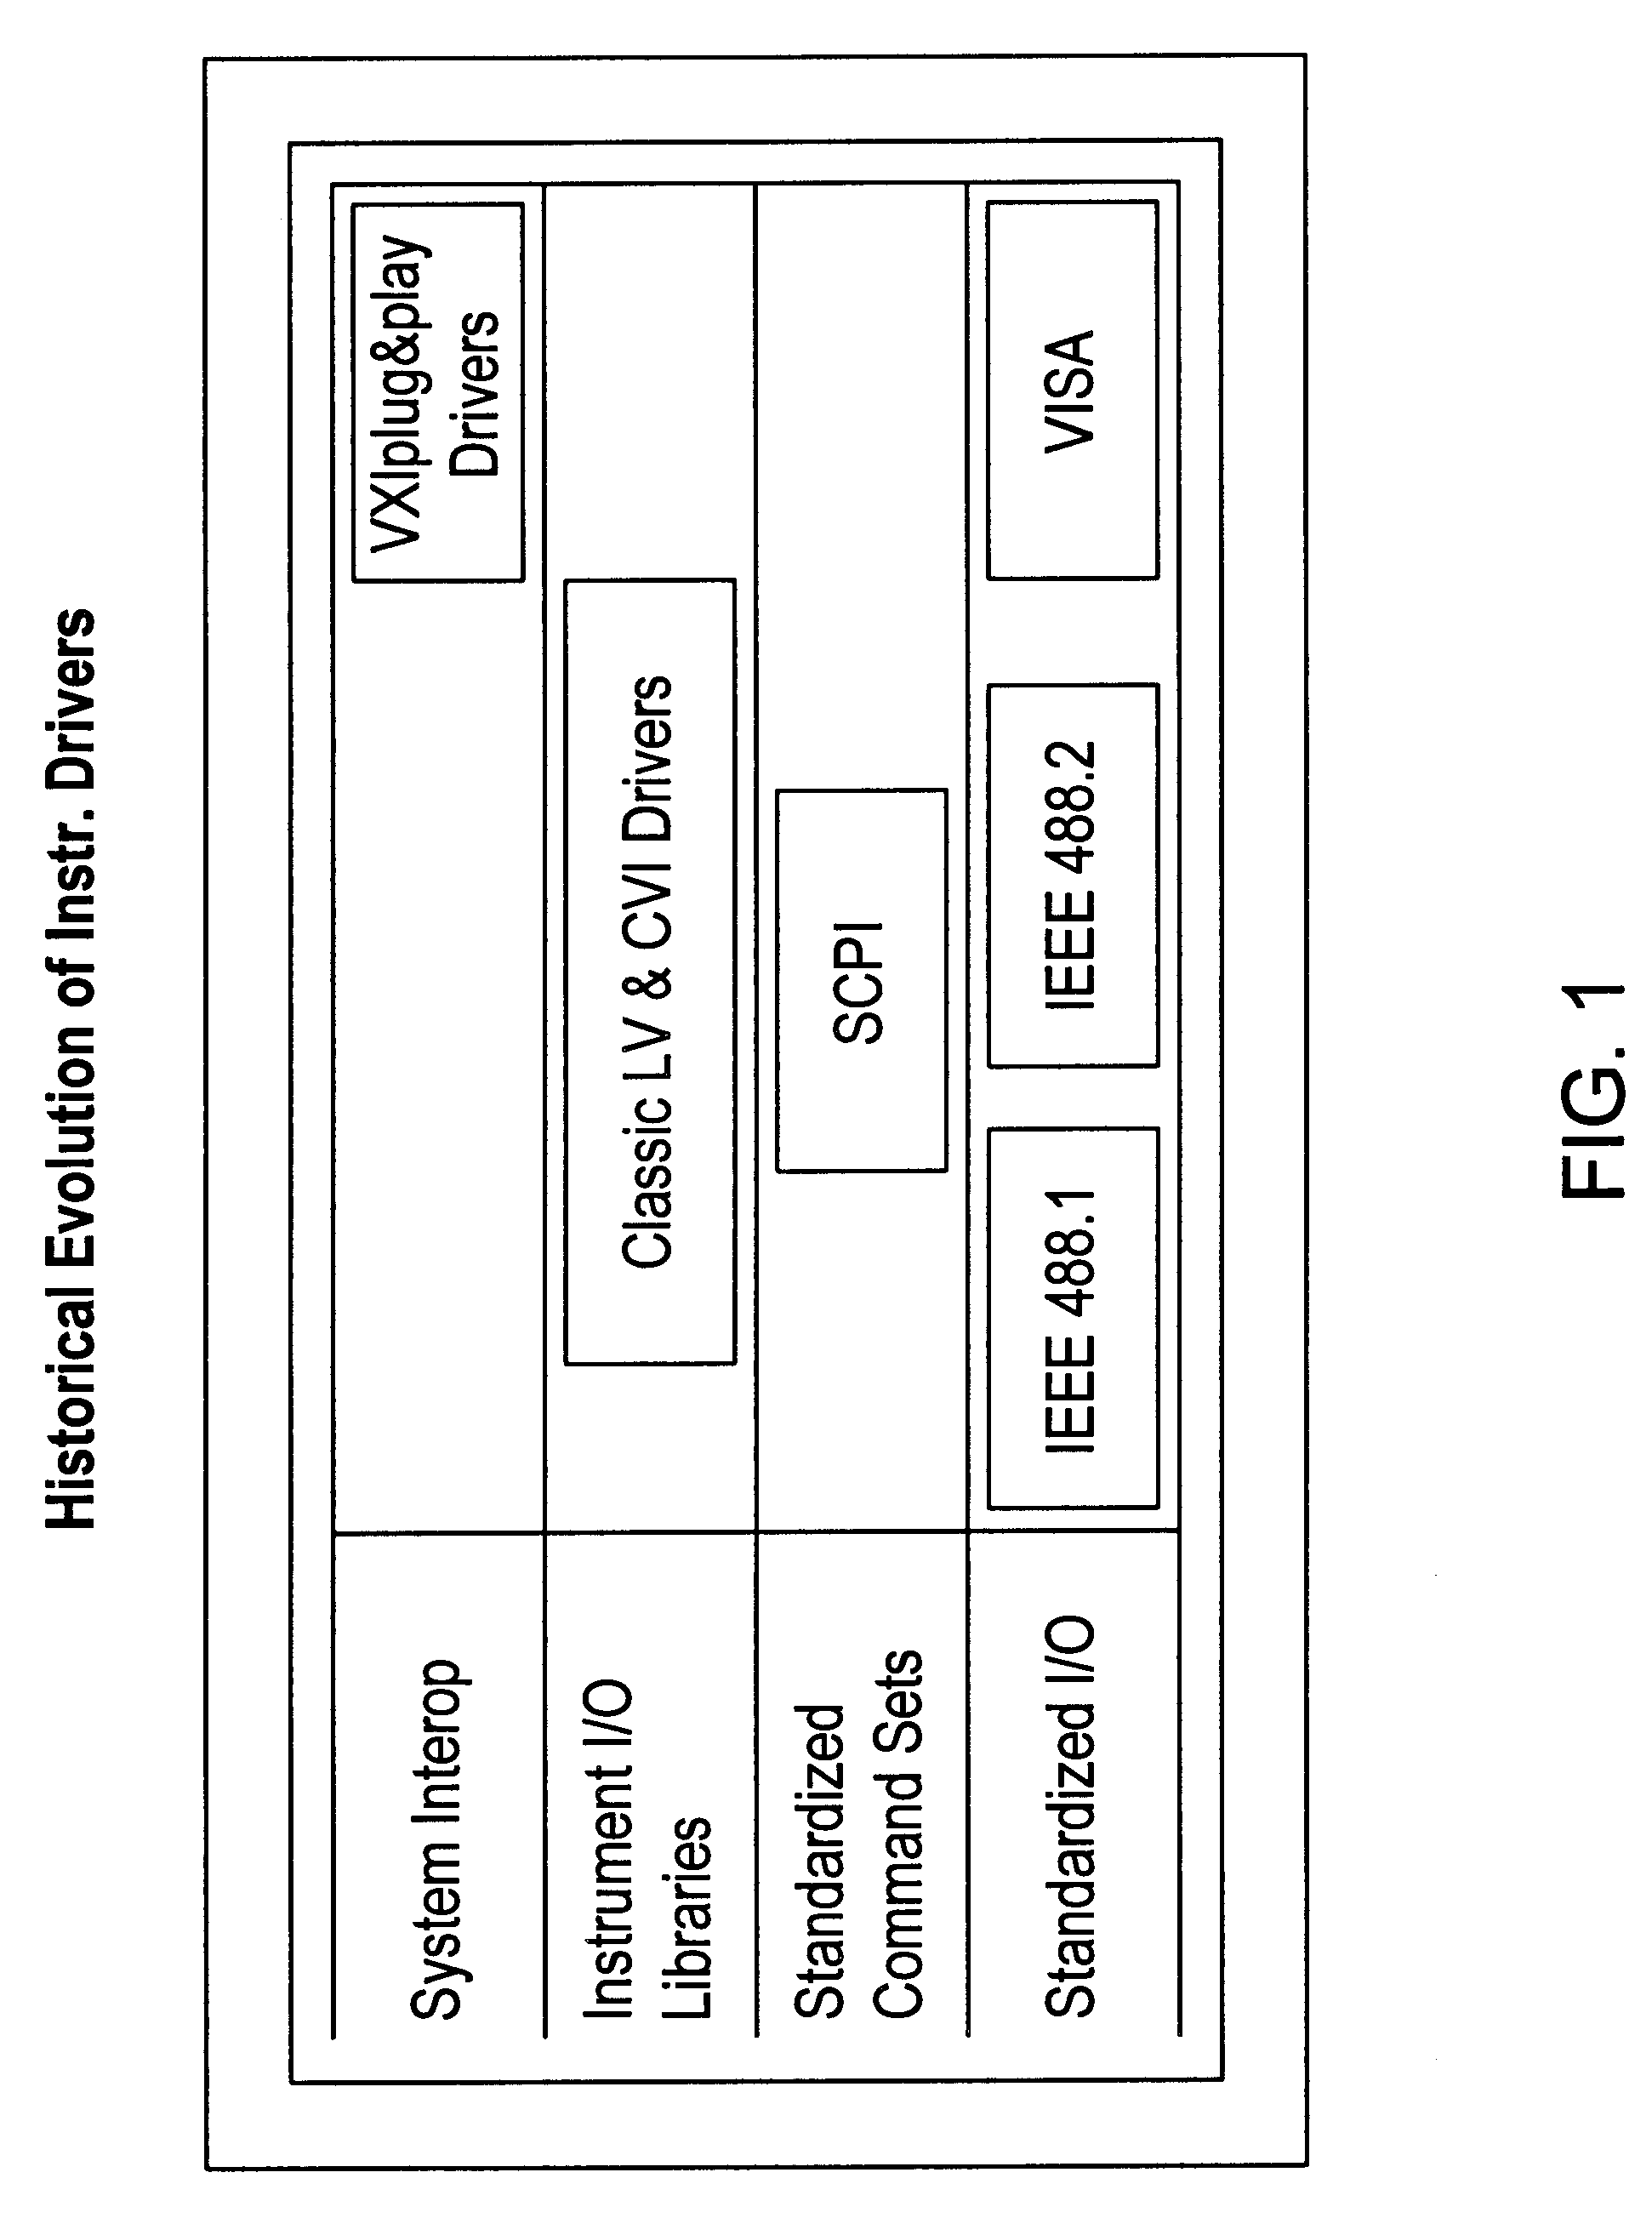 Instrumentation system and method which performs instrument interchangeability checking